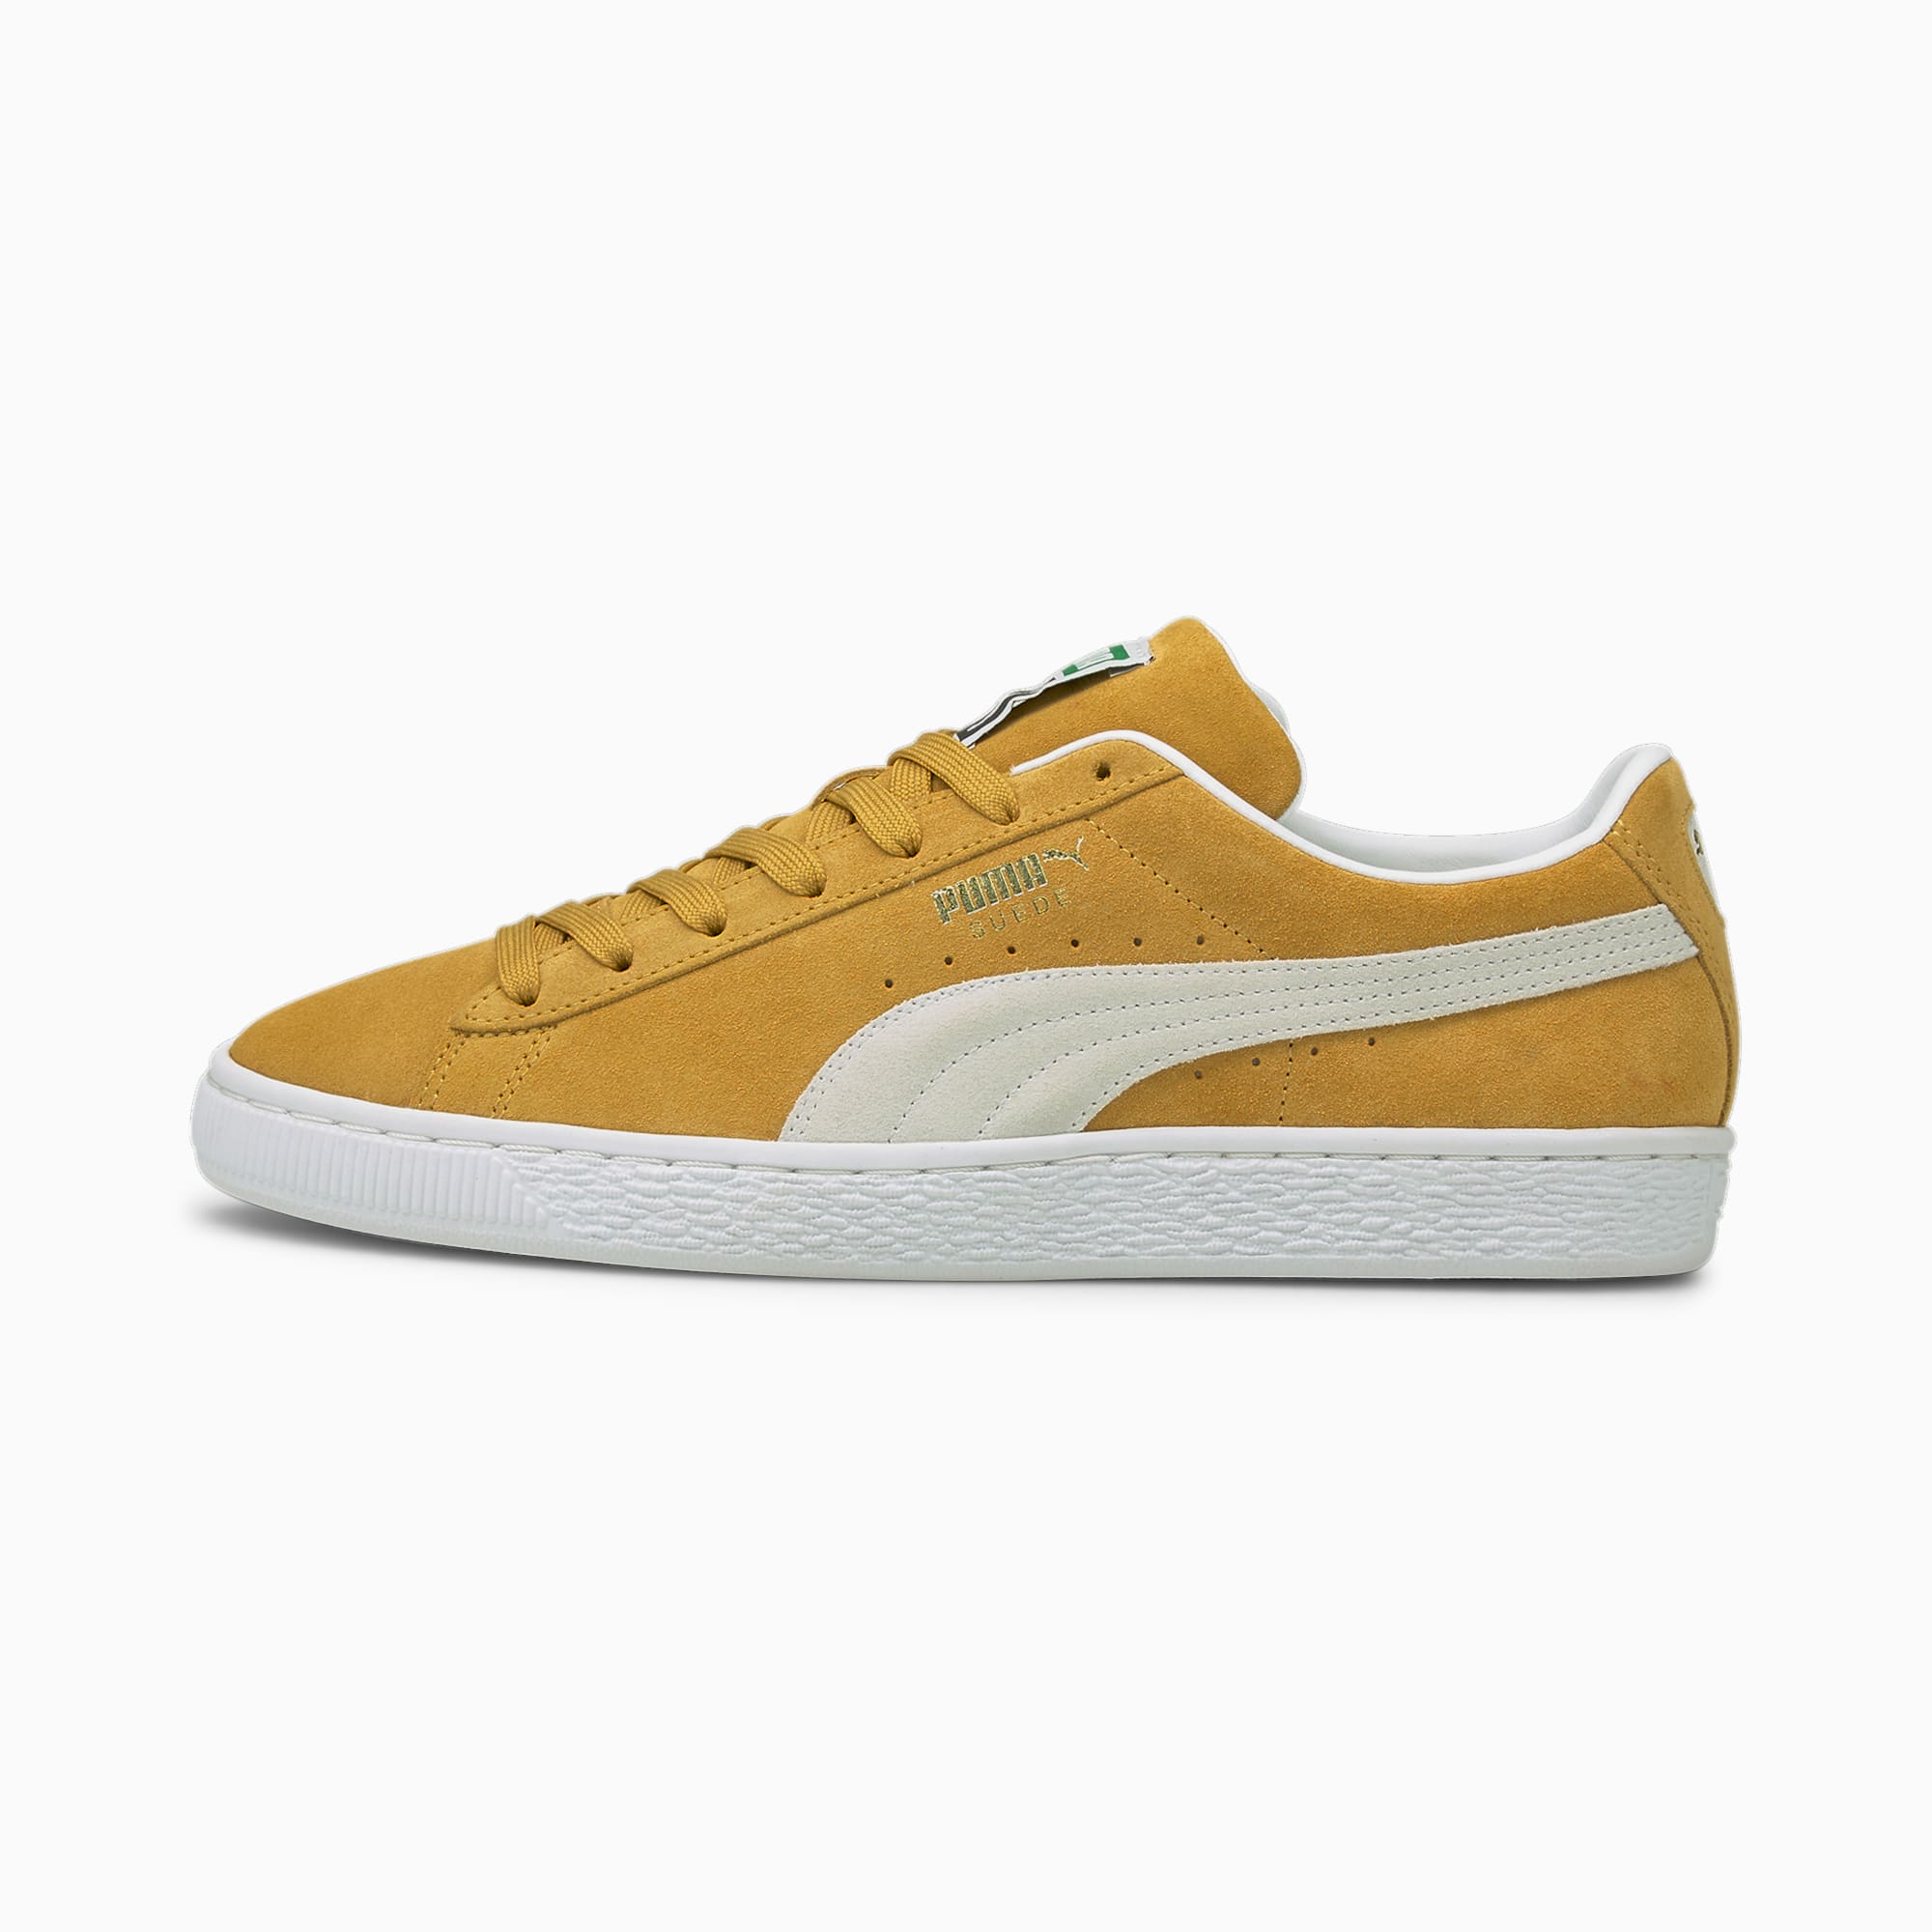 Puma Classic Shoes Yellow | vlr.eng.br